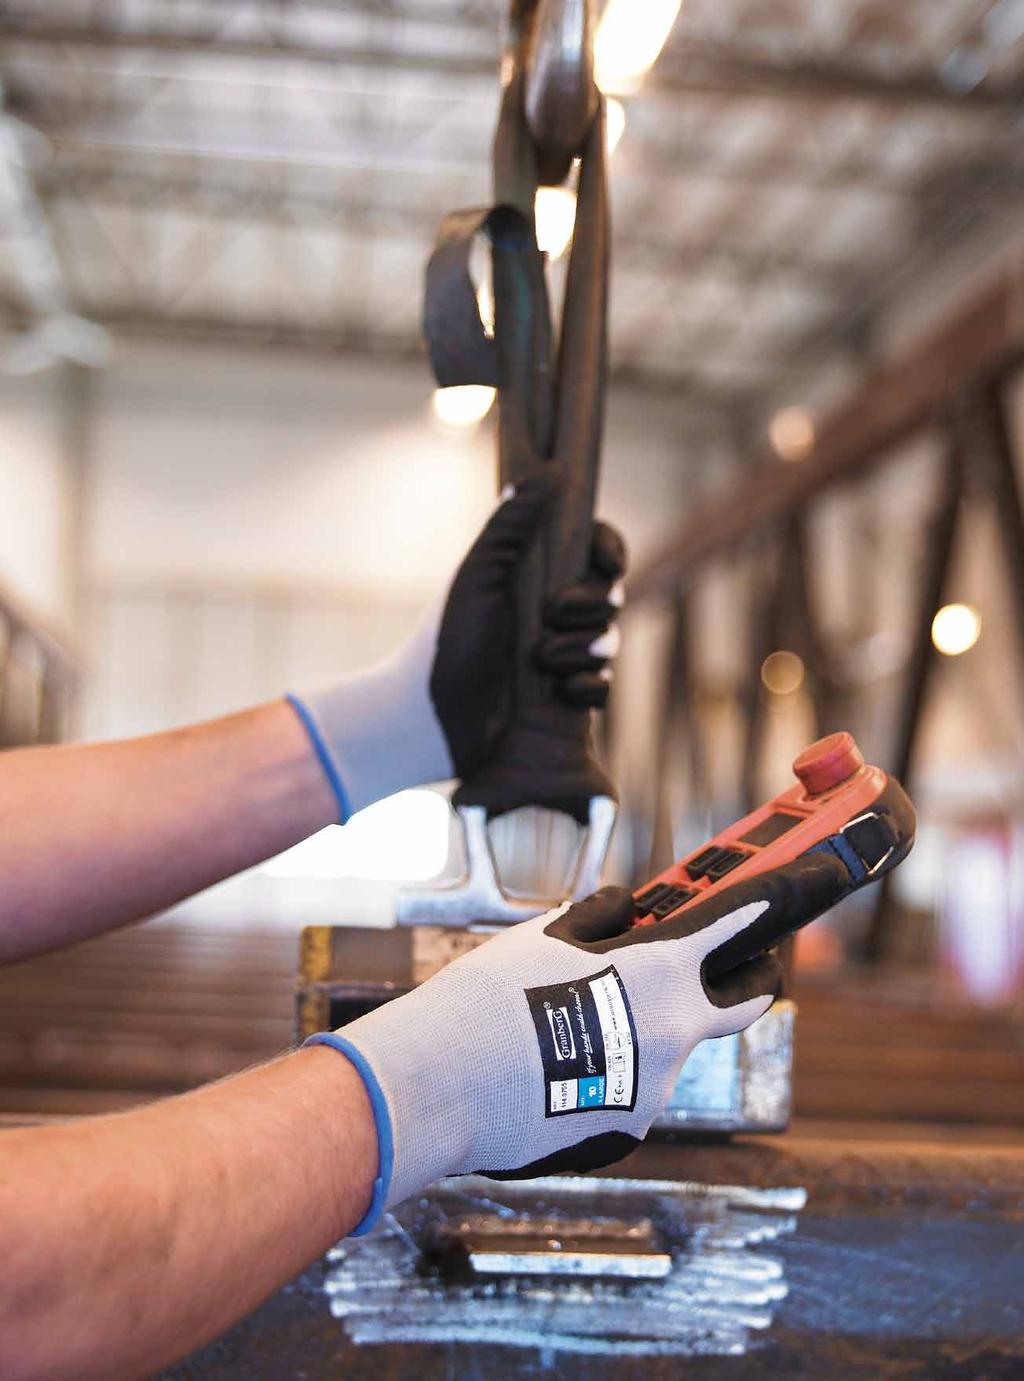 2.0 Extreme-Fit Assembly Gloves The world is changing. Heavy industry is moving eastward, while light industry is taking over.